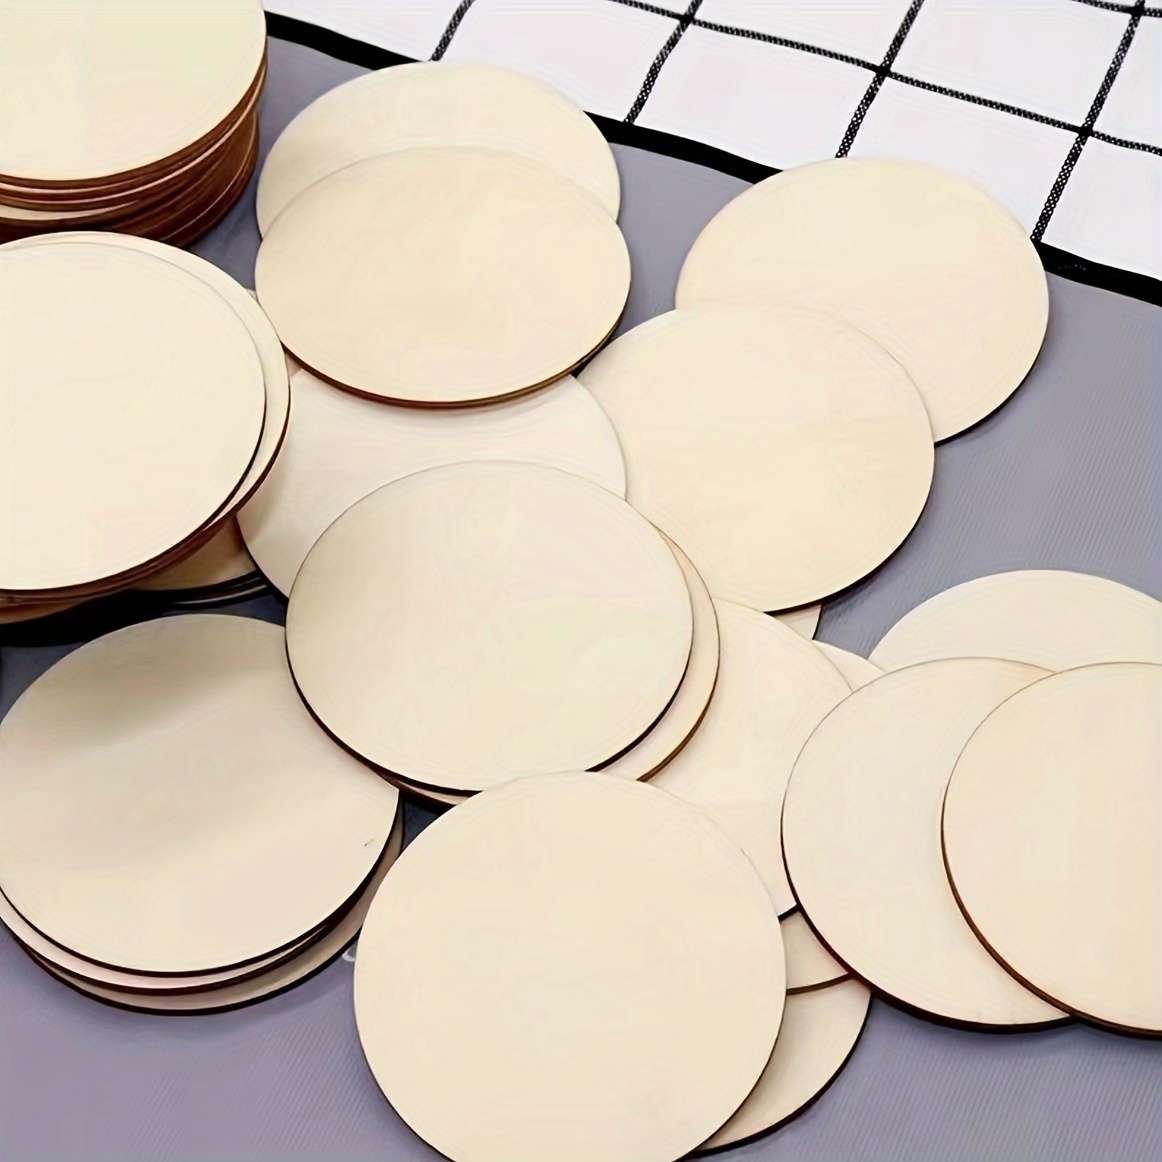 10Pcs 20cm/8in Unfinished Blank Wood for Crafts Thin Wooden Discs Round  Wood Slices for Pyrography